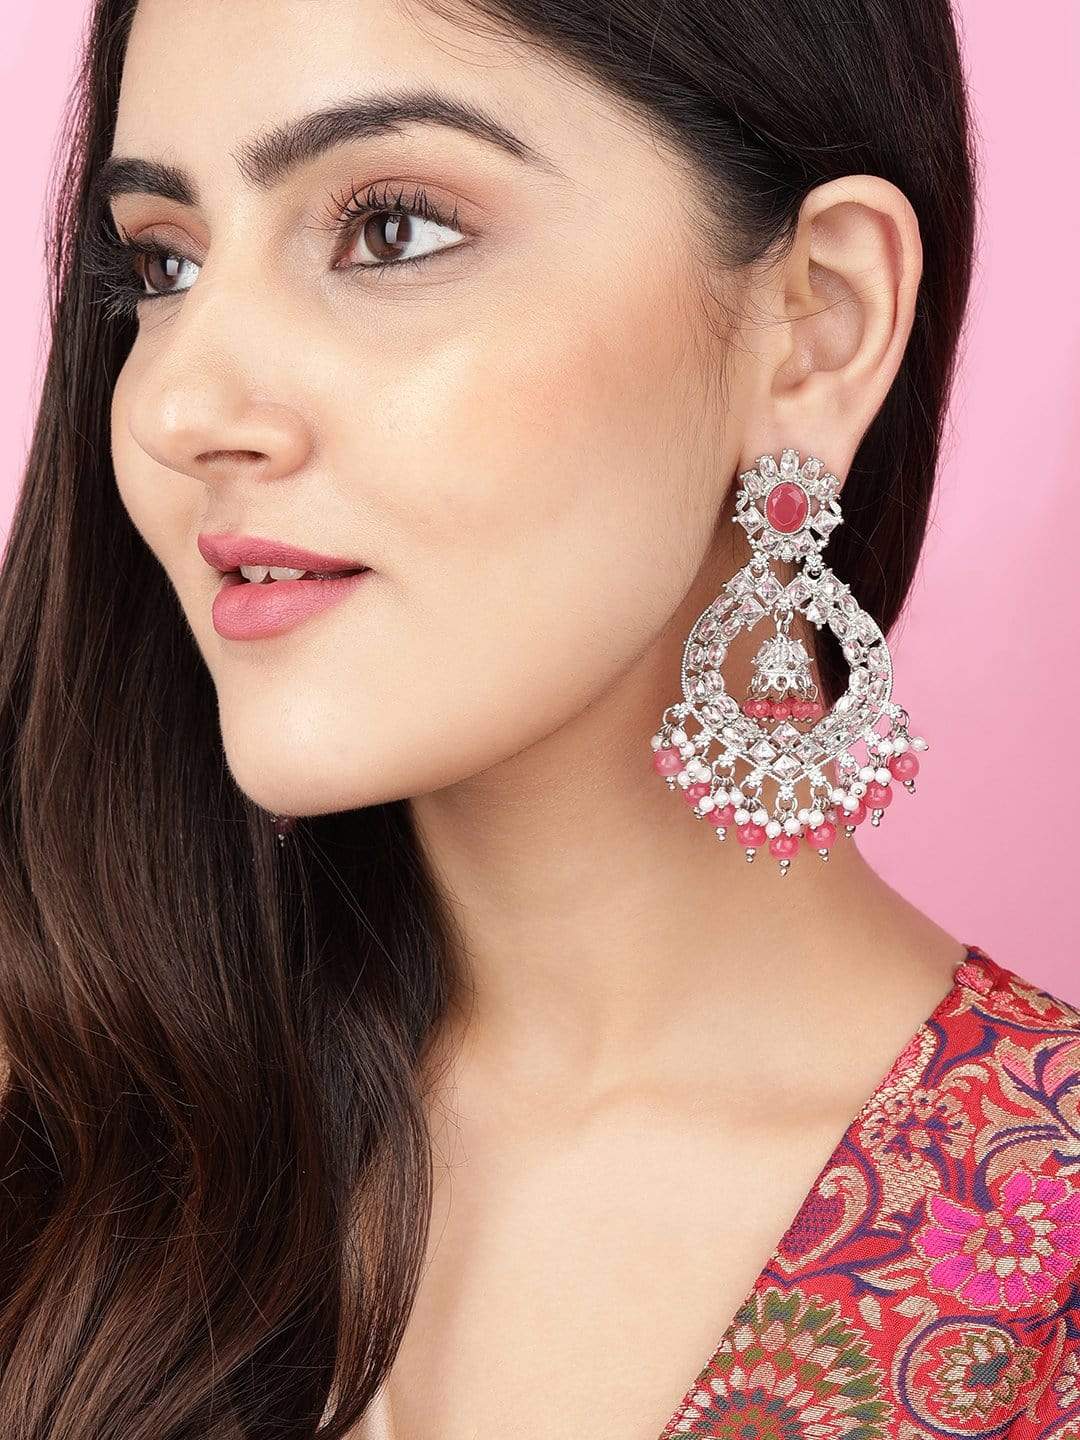 Rubans Silver Plated Handcrafted AD Studded & Pink Beads Chandbali Earrings Earrings